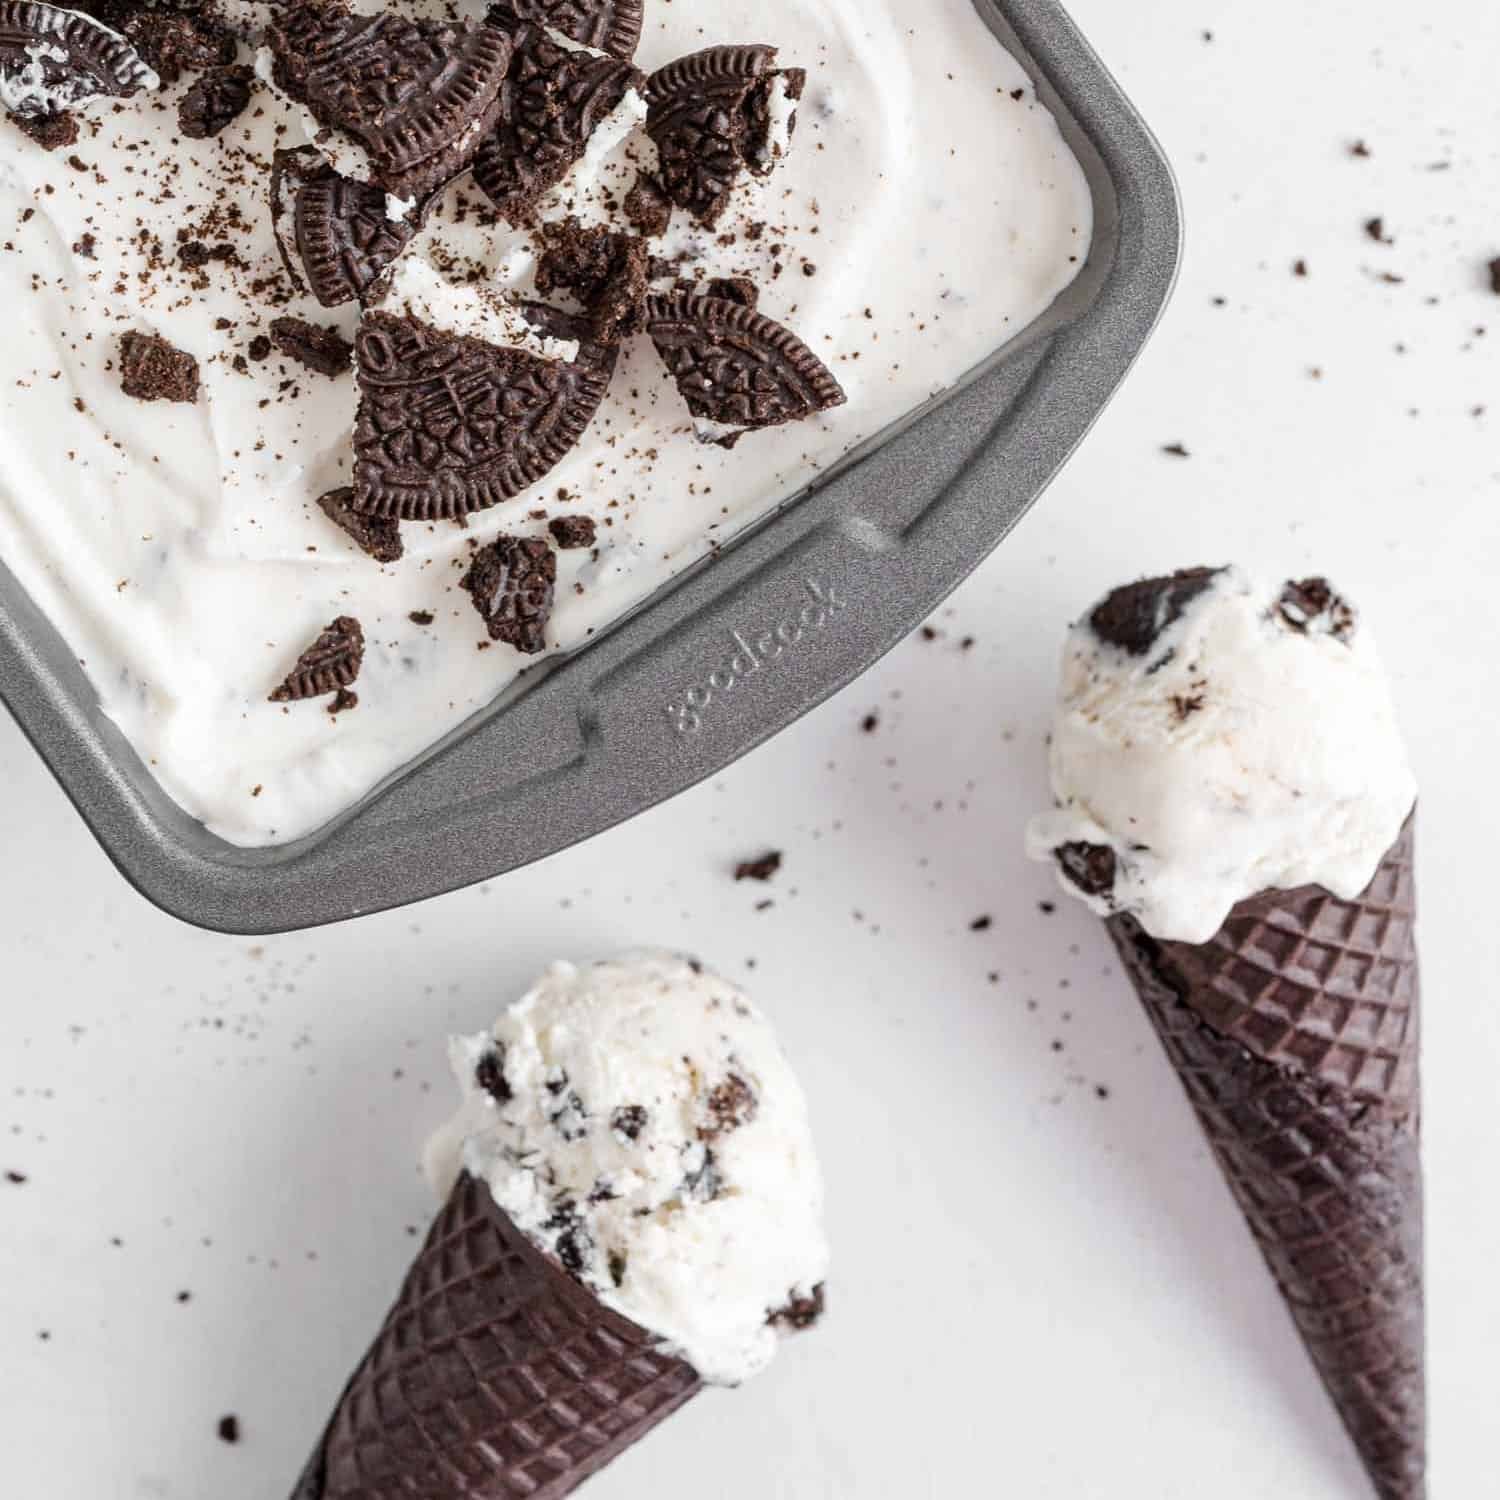 Oreo ice cream in a pan and in two chocolate cones.